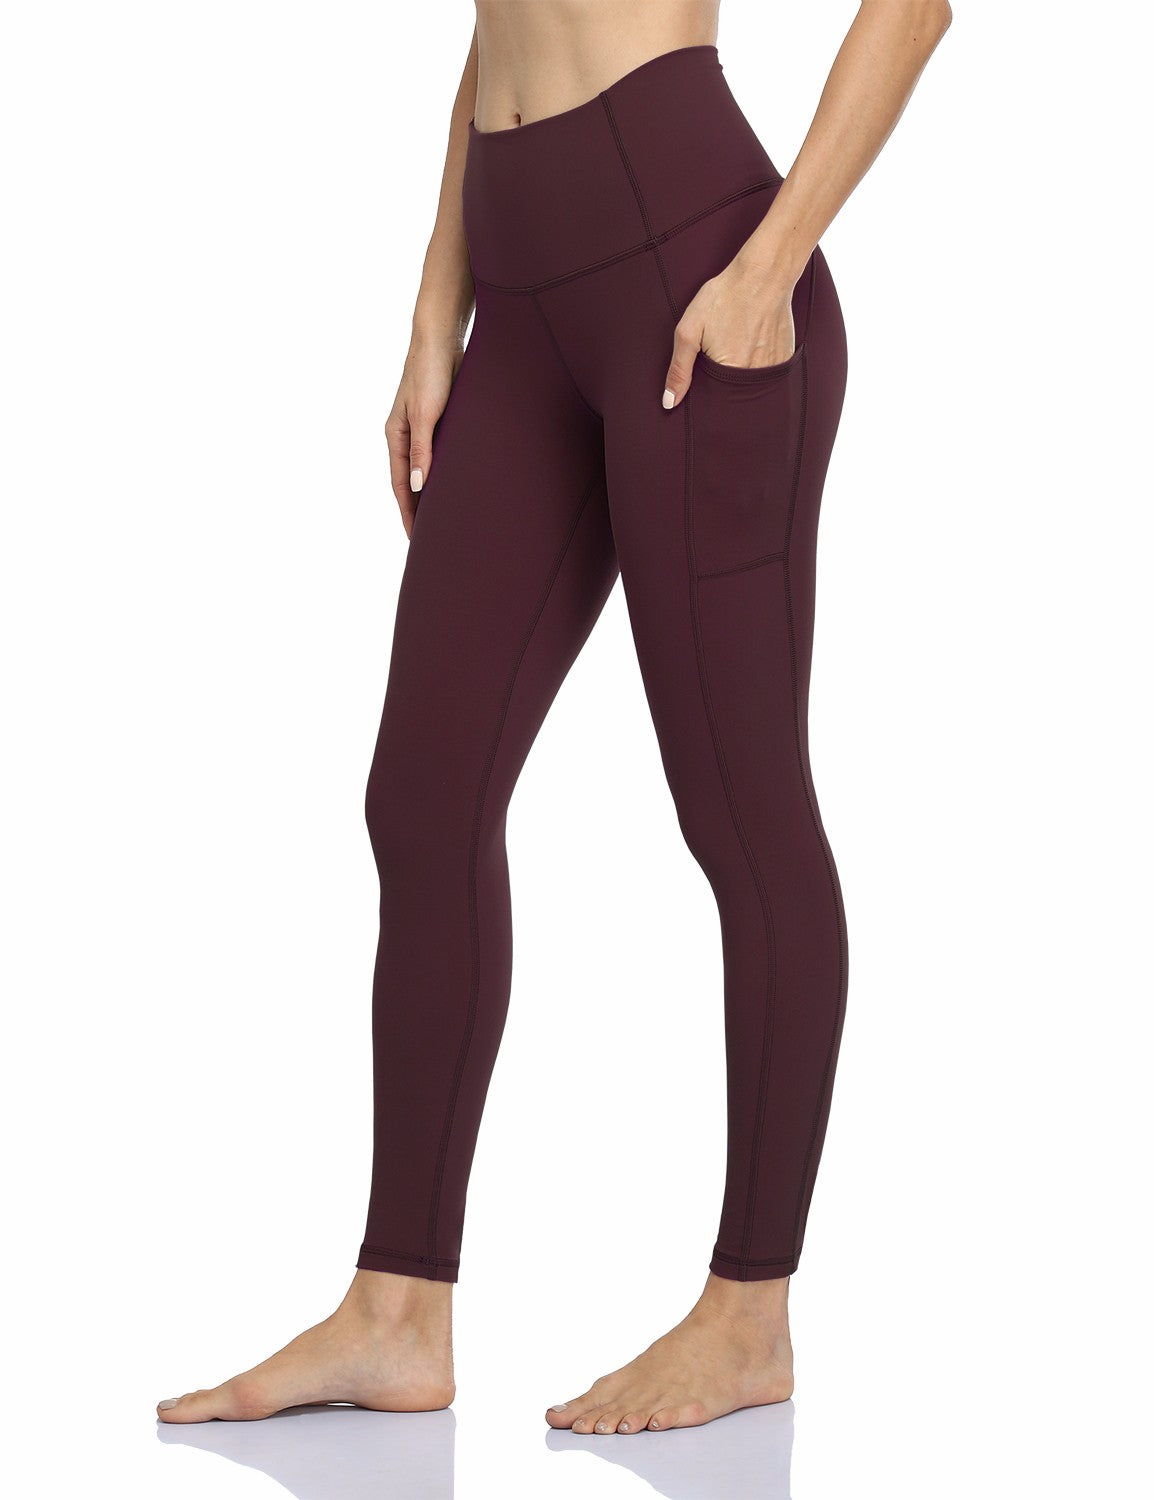 HeyNuts Pure&Plain 7/8 High Waisted Leggings for Women, Athletic  Compression Tummy Control Workout Yoga Pants 25'' Berry Magenta XXS(00) :  Buy Online at Best Price in KSA - Souq is now : Fashion